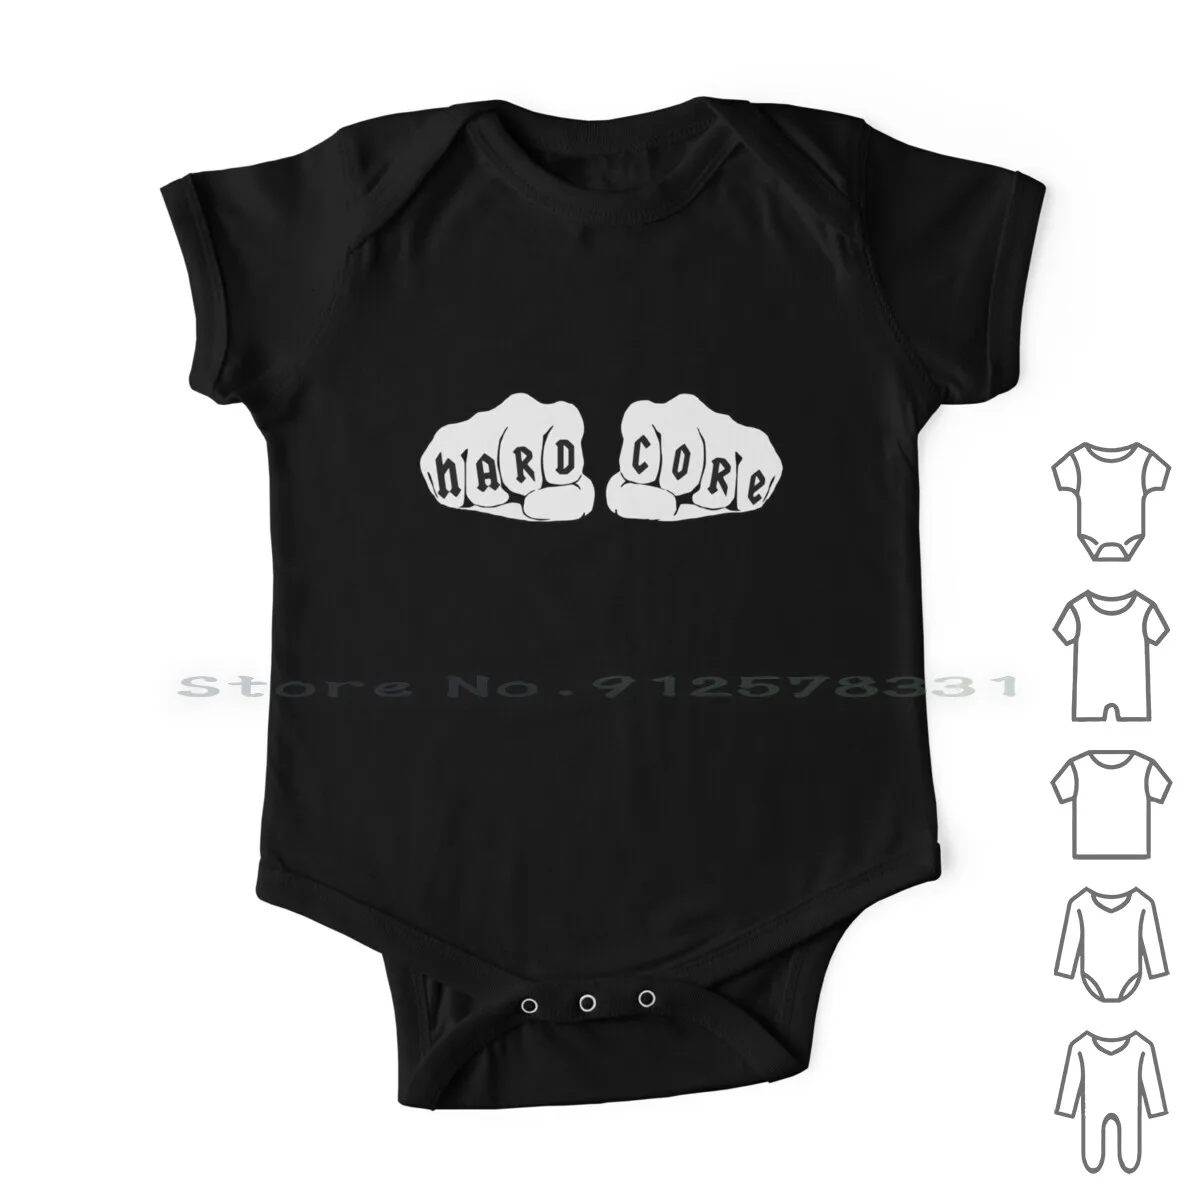 

Hardcore Fists Newborn Baby Clothes Rompers Cotton Jumpsuits Dj Rave Hardstyle Trance Techno Music House Electro Dubstep Edm